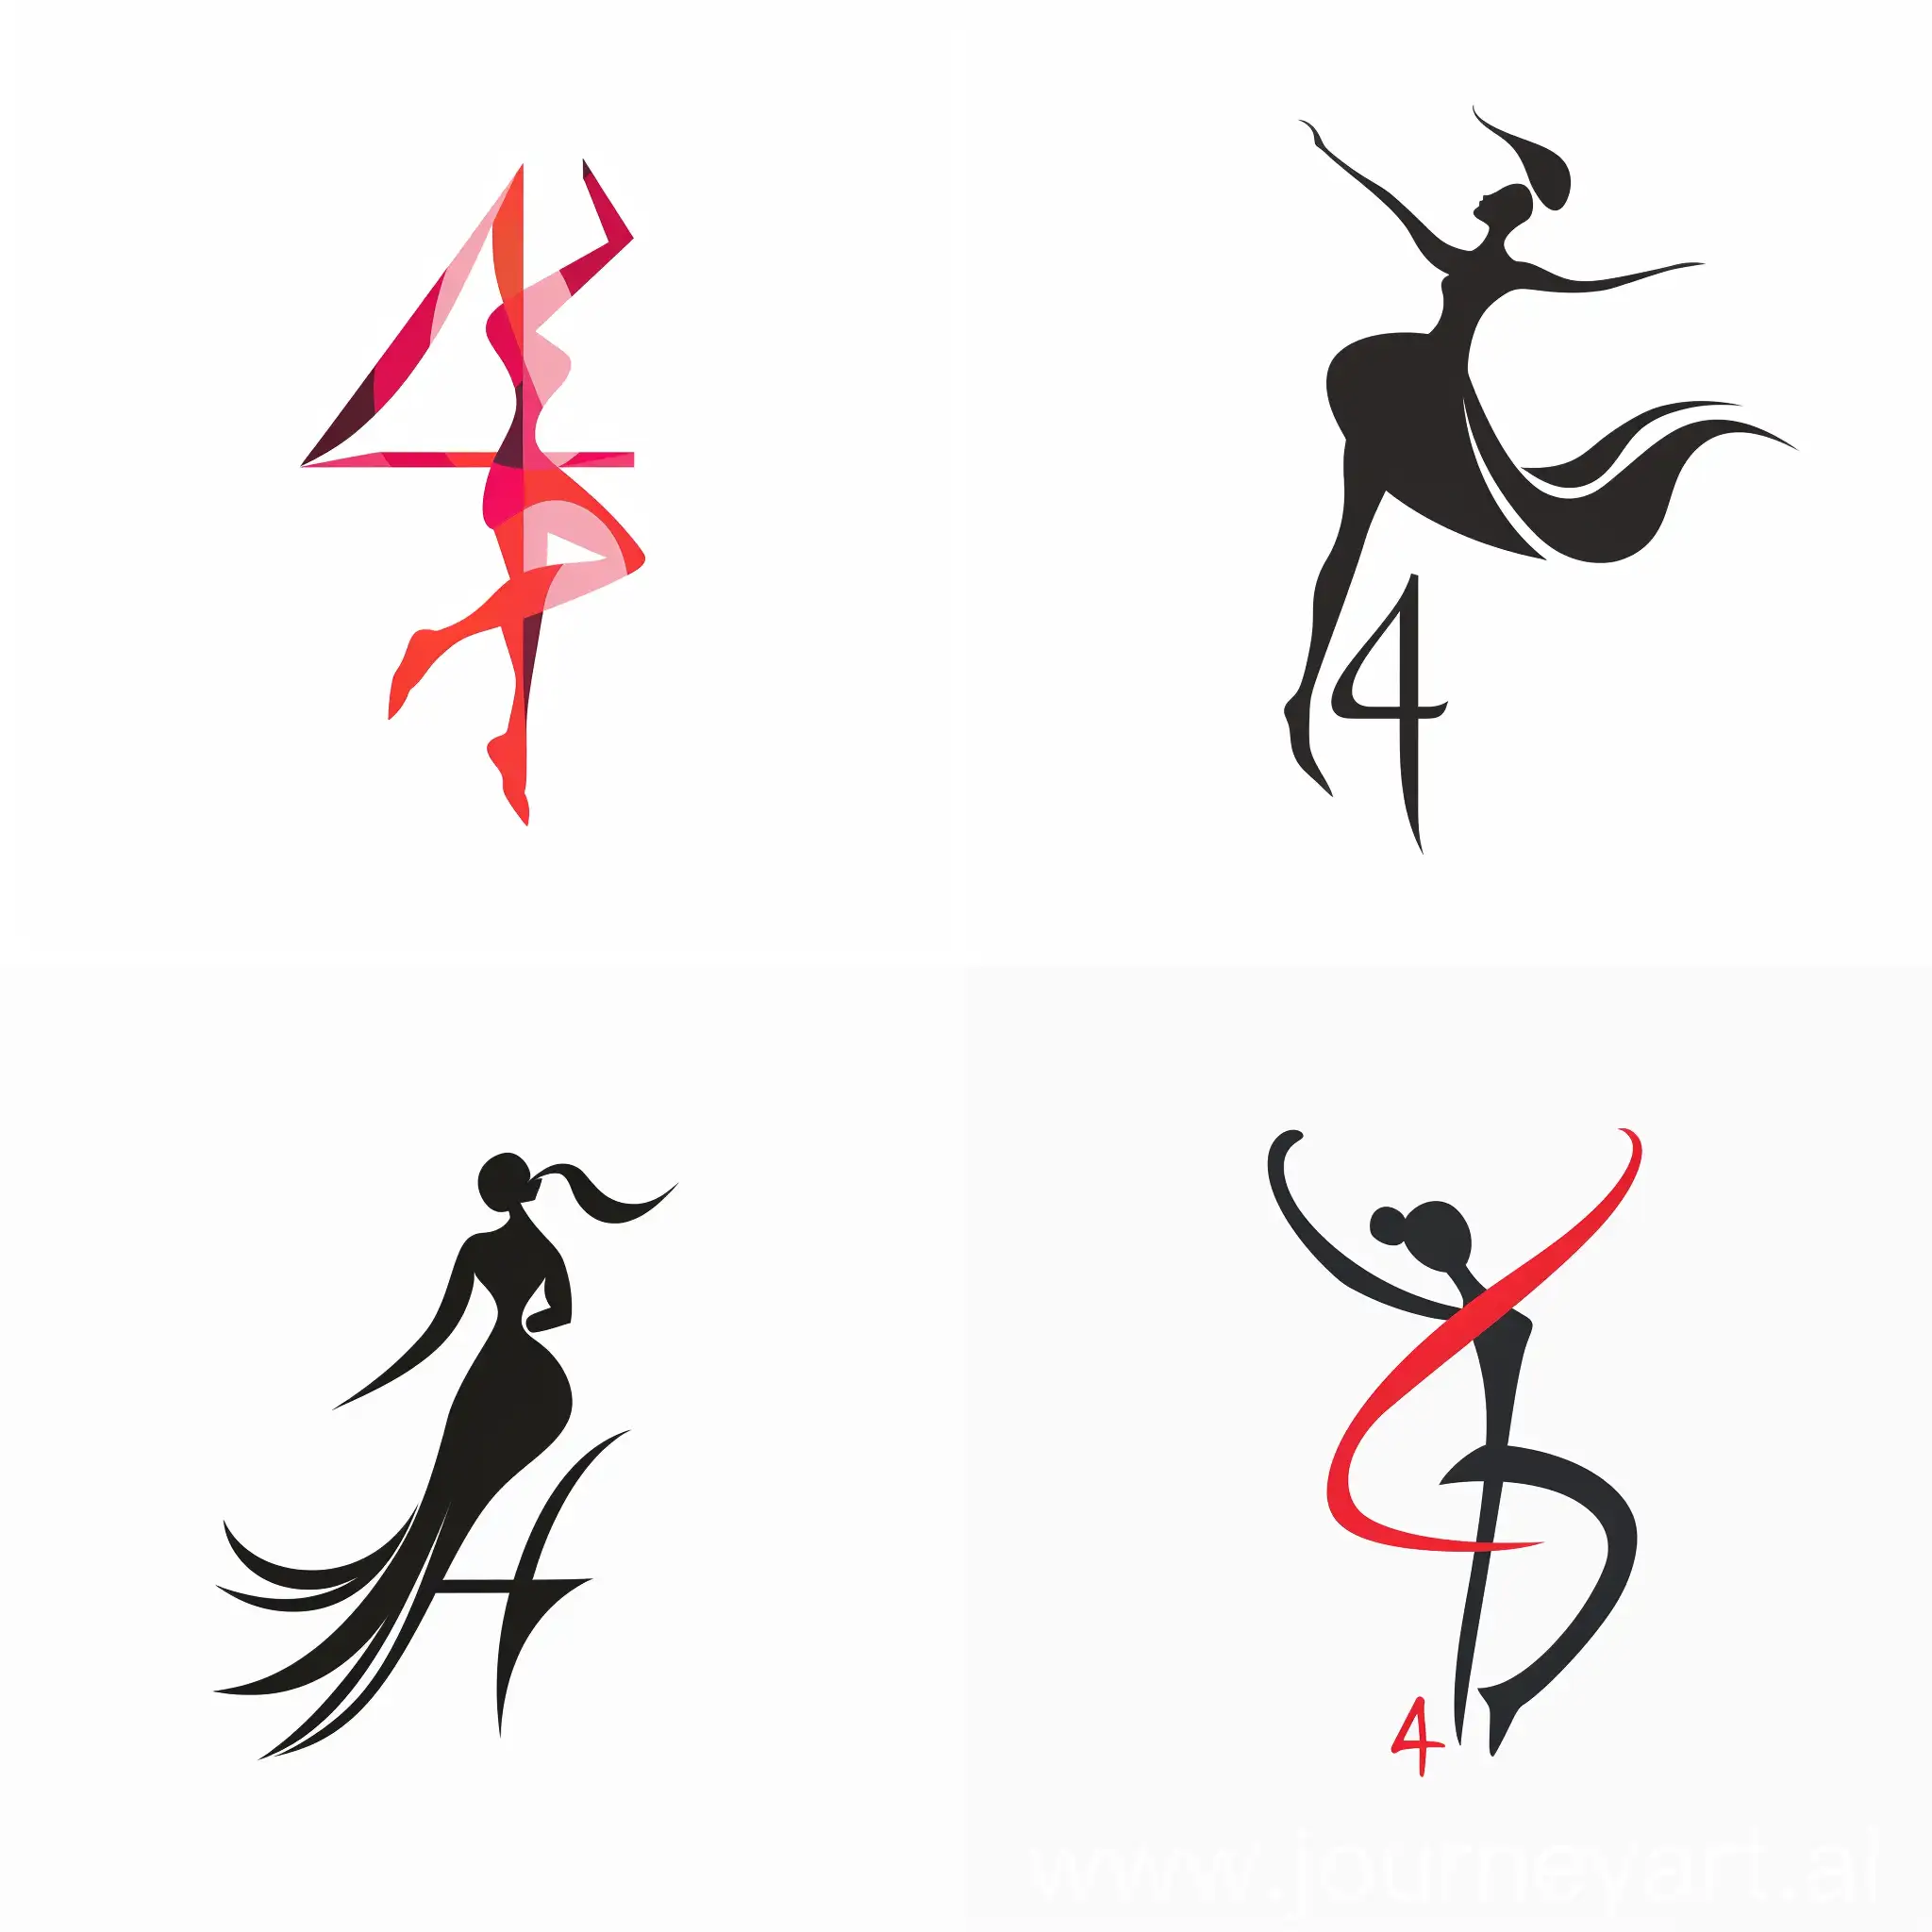 Draw the logo for the dance award in the form of the number "4". The logo should be in a minimalist style, display the number "4" and the dance itself, and also be simple.